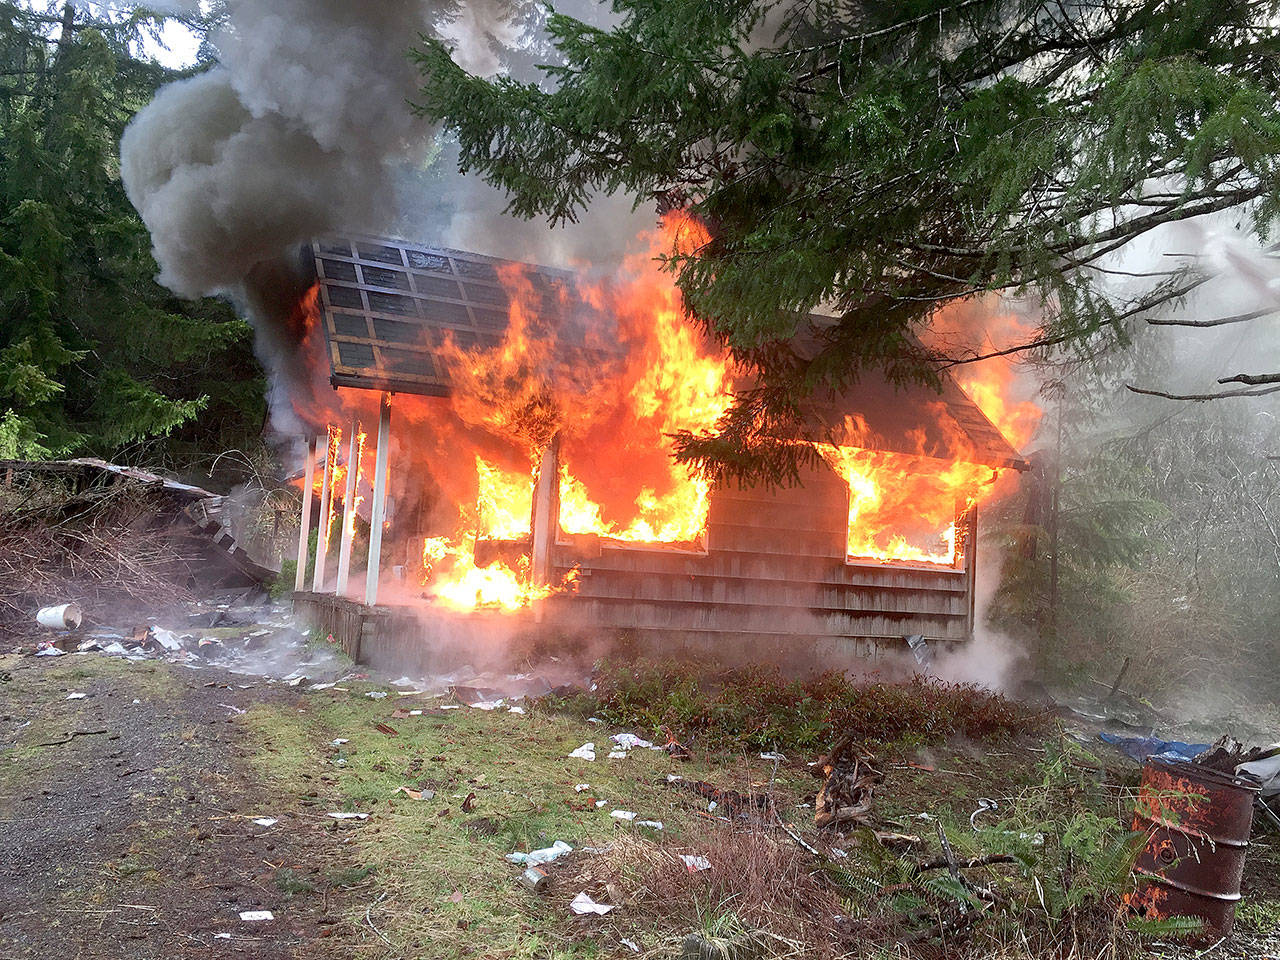 Sandy Floe’s house was consumed by flames in a permitted, controlled burn. (Bill Paul/Clallam County Fire District No. 1)